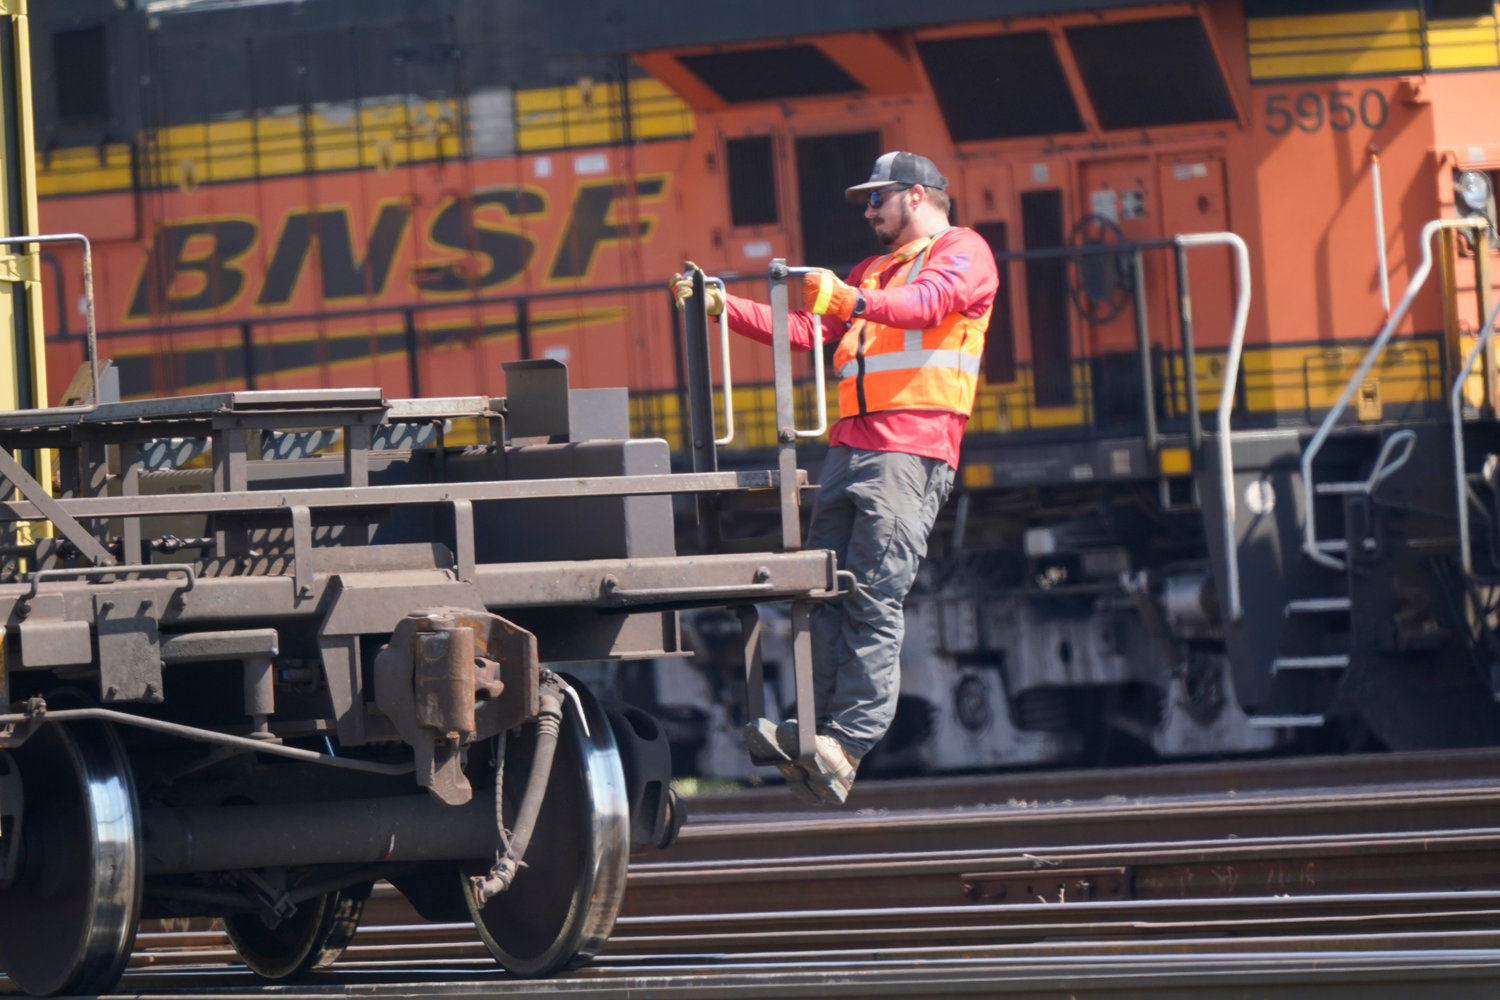 A worker rode a rail car at a BNSF rail crossing in Saginaw, Texas, in September. Most railroad workers weren't surprised that Congress intervened last week to block a railroad strike, but they were disappointed because they say the deals lawmakers imposed didn't do enough to address their quality of life concerns about demanding schedules and the lack of paid sick time.